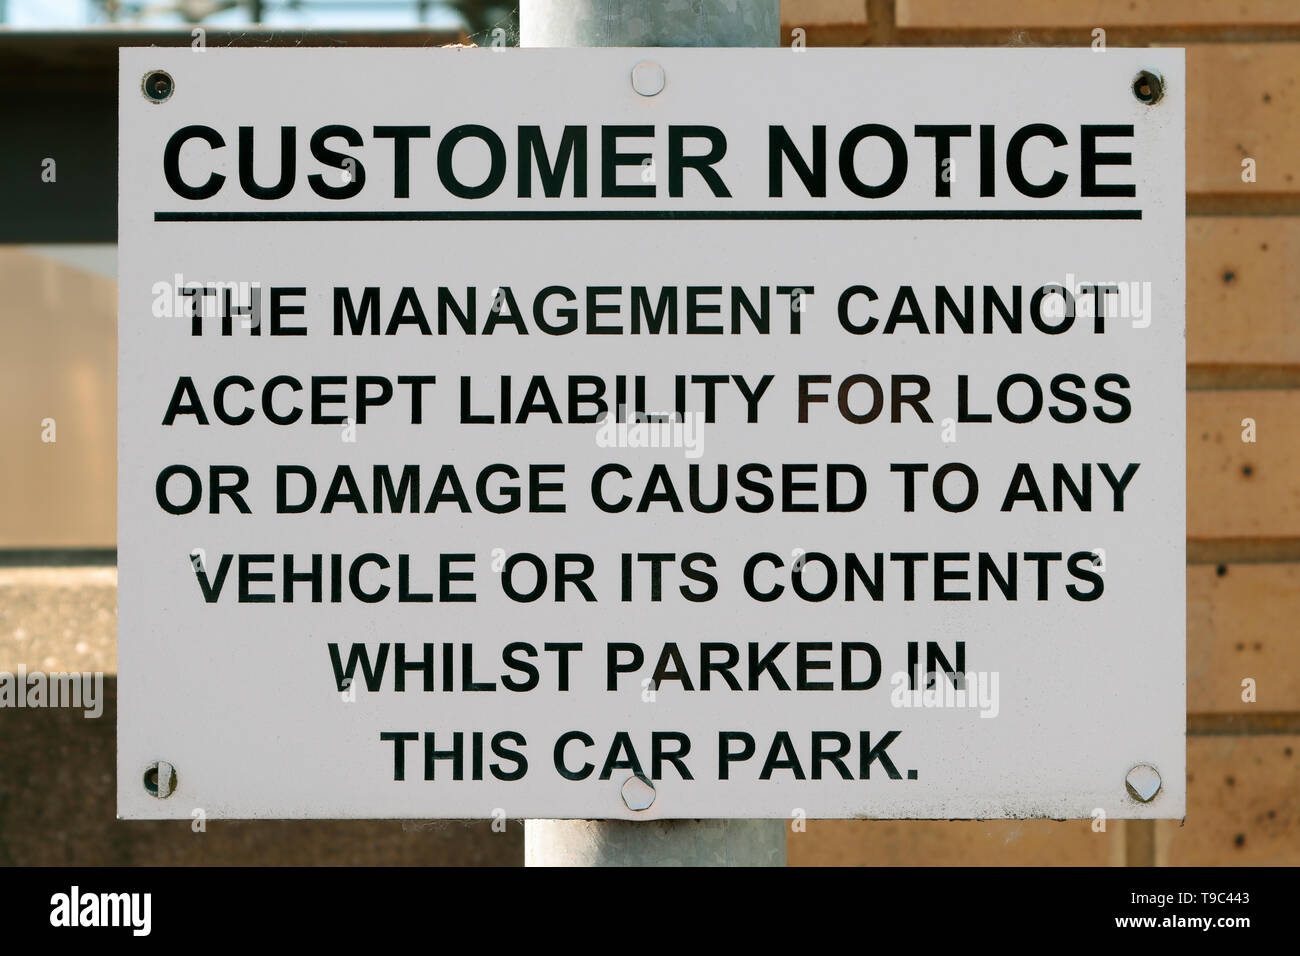 Customer Notice - the Management cannot accept liability for loss or damagecaused to any vehicle or its contents whilst parked in this car park. Stock Photo